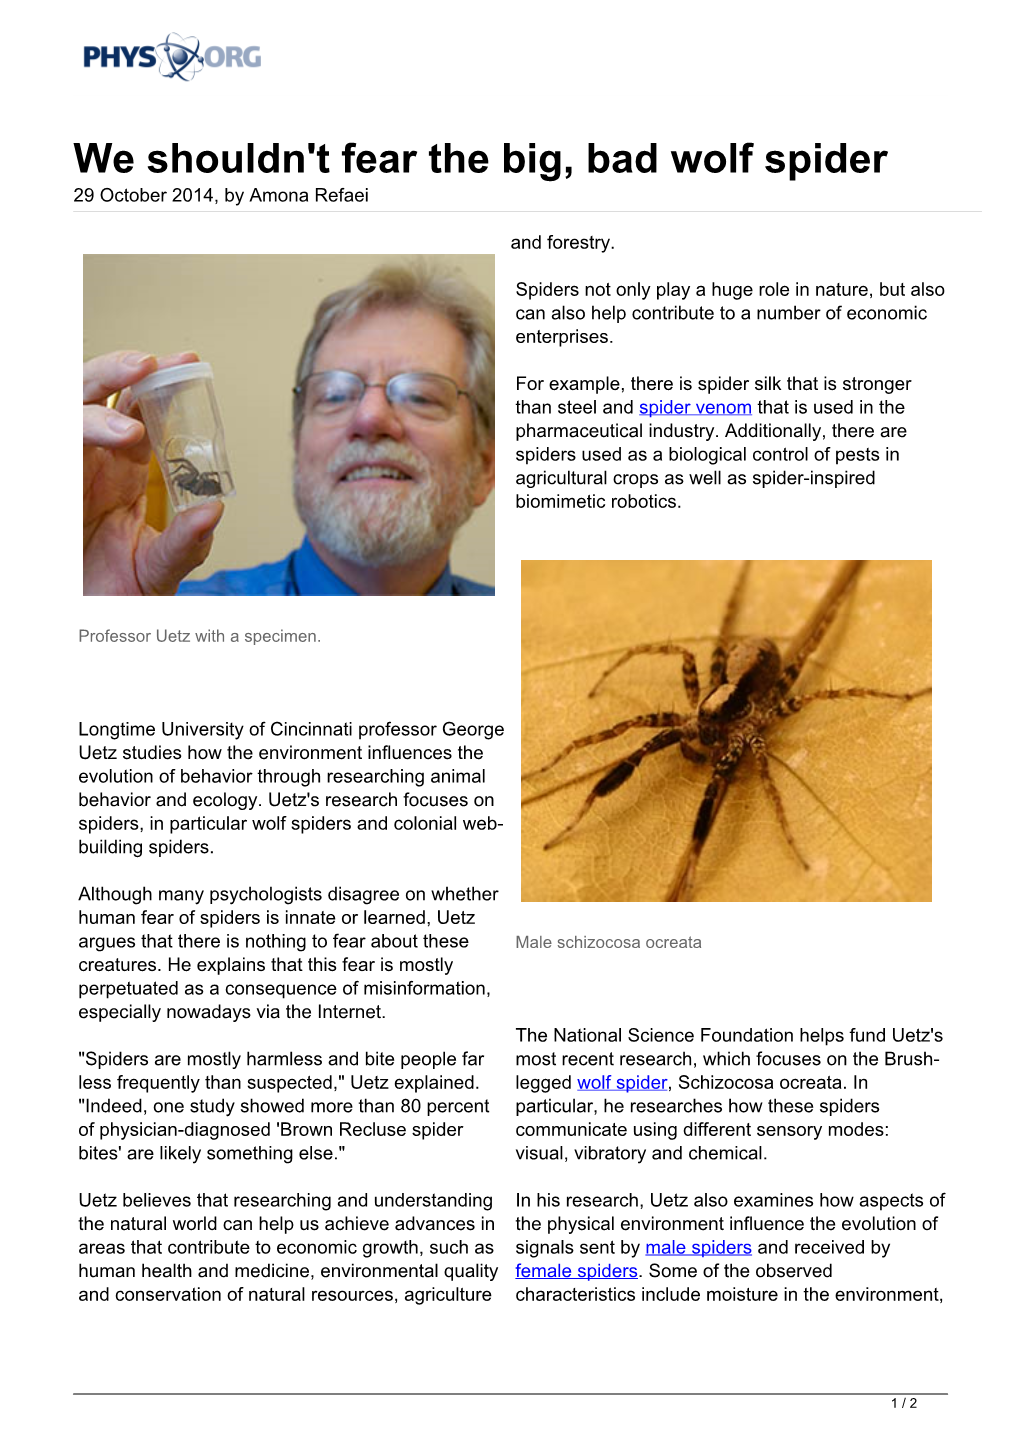 We Shouldn't Fear the Big, Bad Wolf Spider 29 October 2014, by Amona Refaei